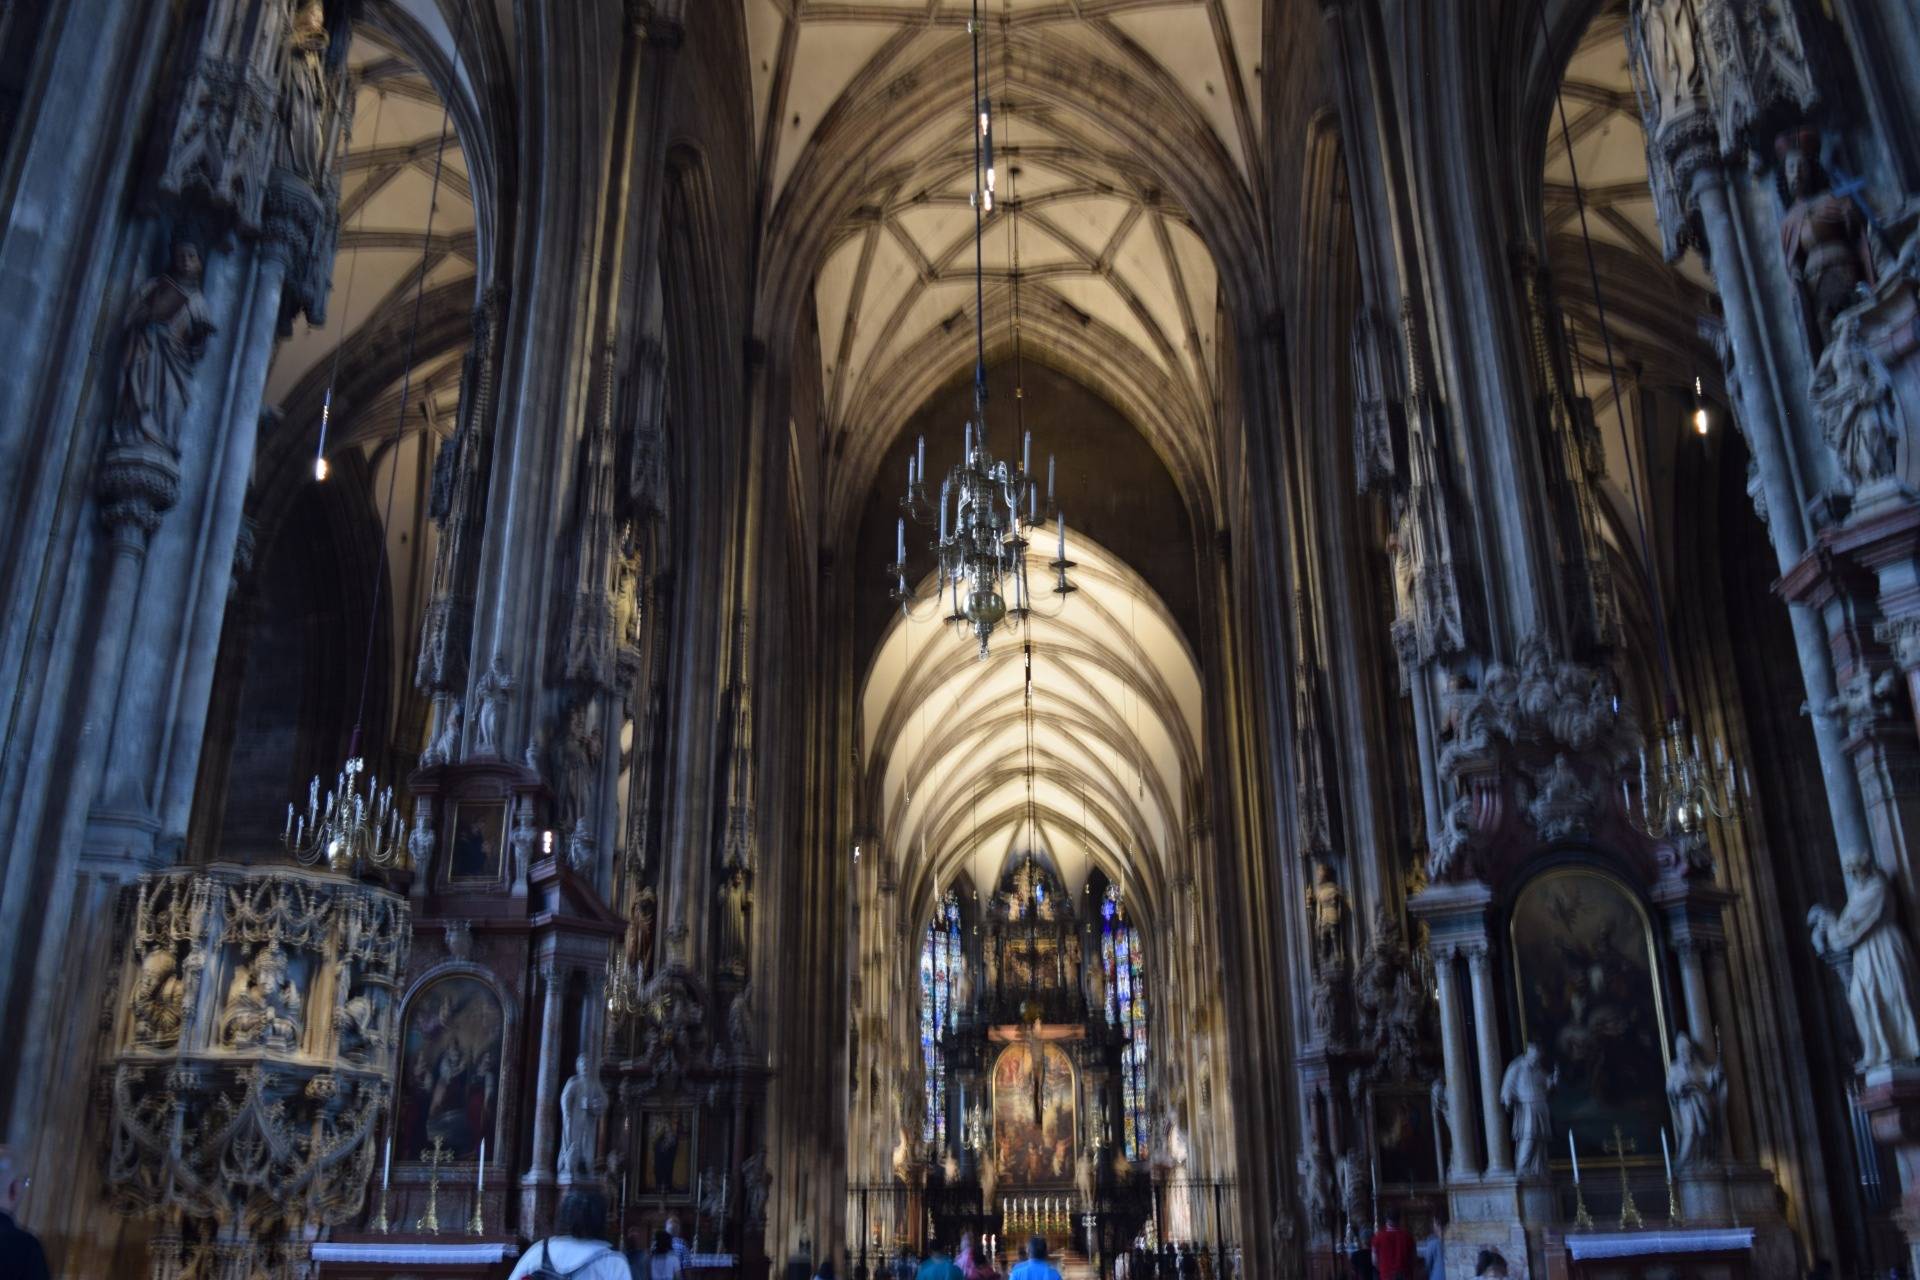 A look inside St Stephens Cathedral